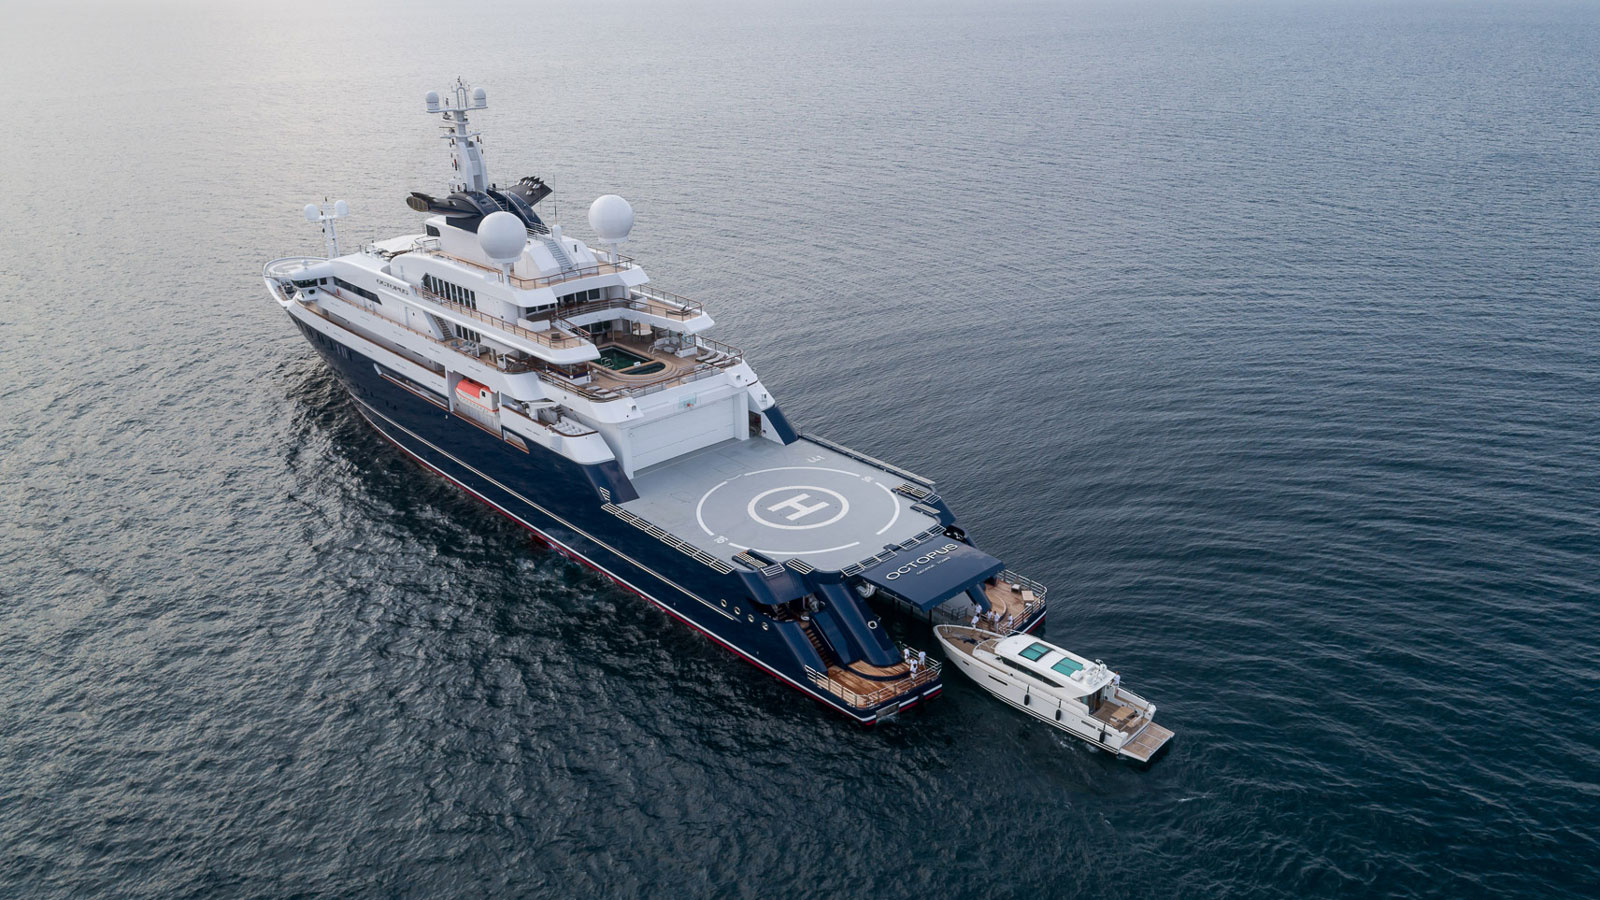 Octopus: The Epitome Of Luxury Super Yachts